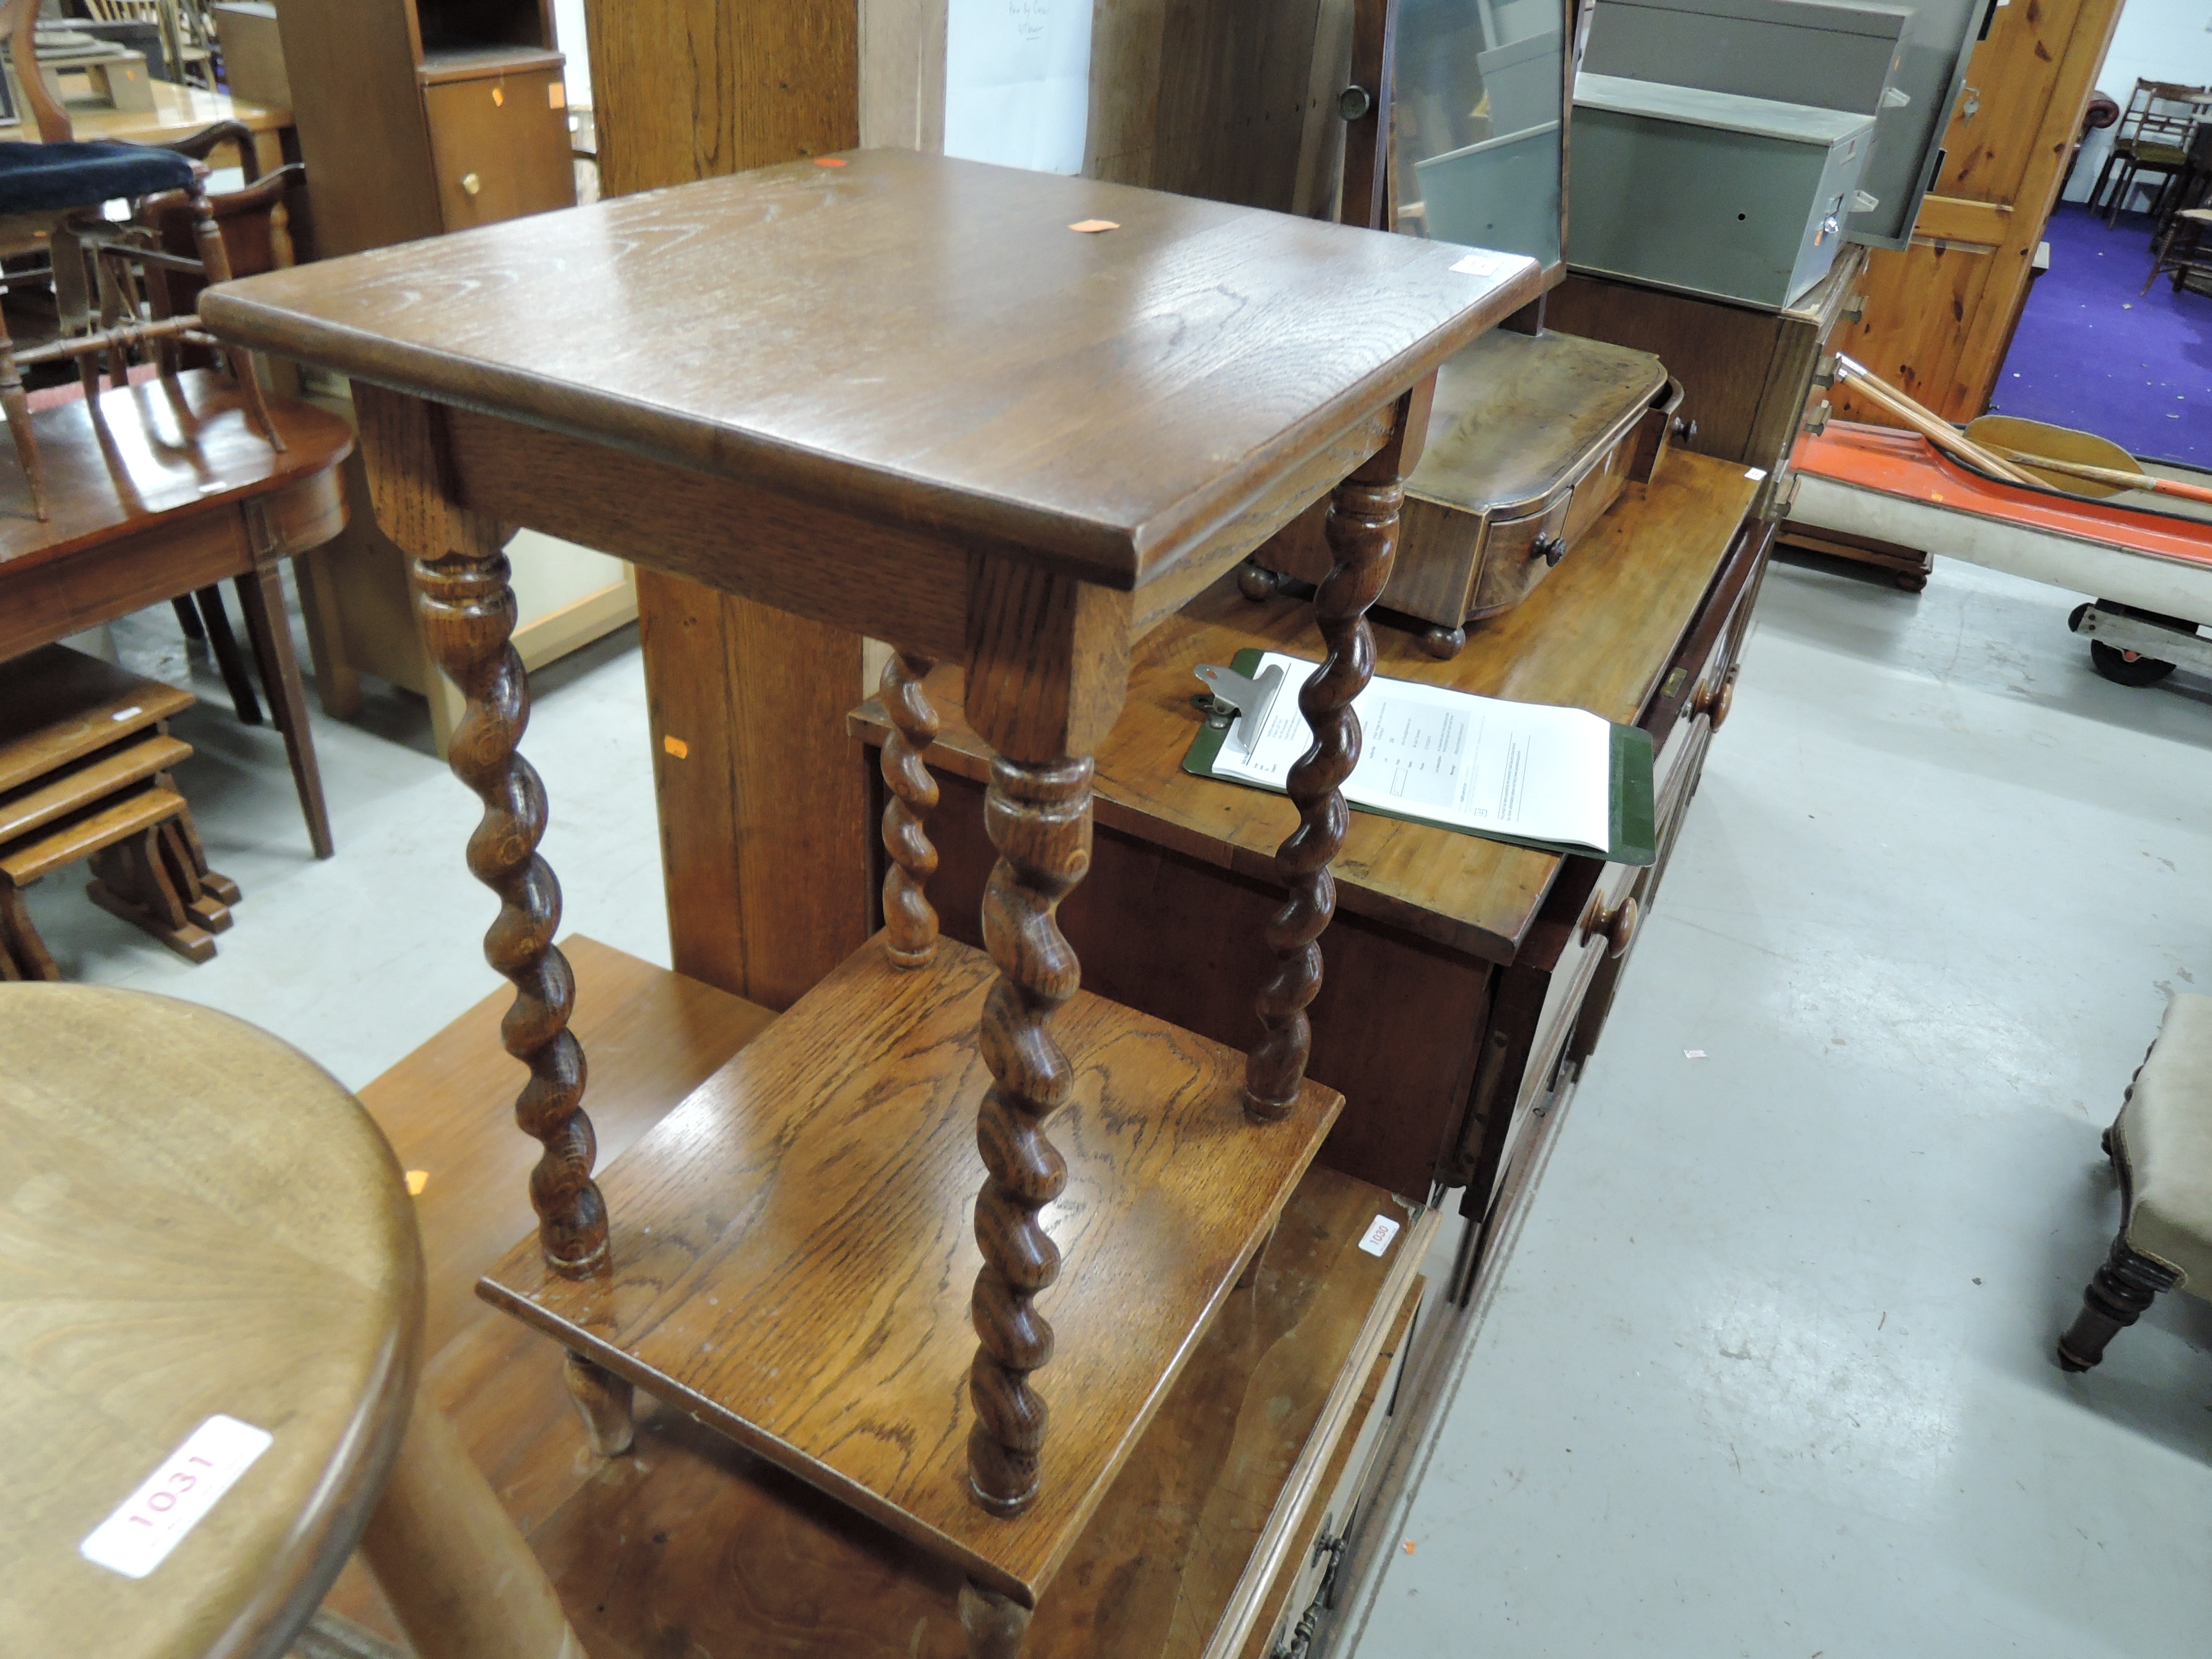 An Edwardian side or hall telephone table having twisted legs with solid oak frame - Image 2 of 2